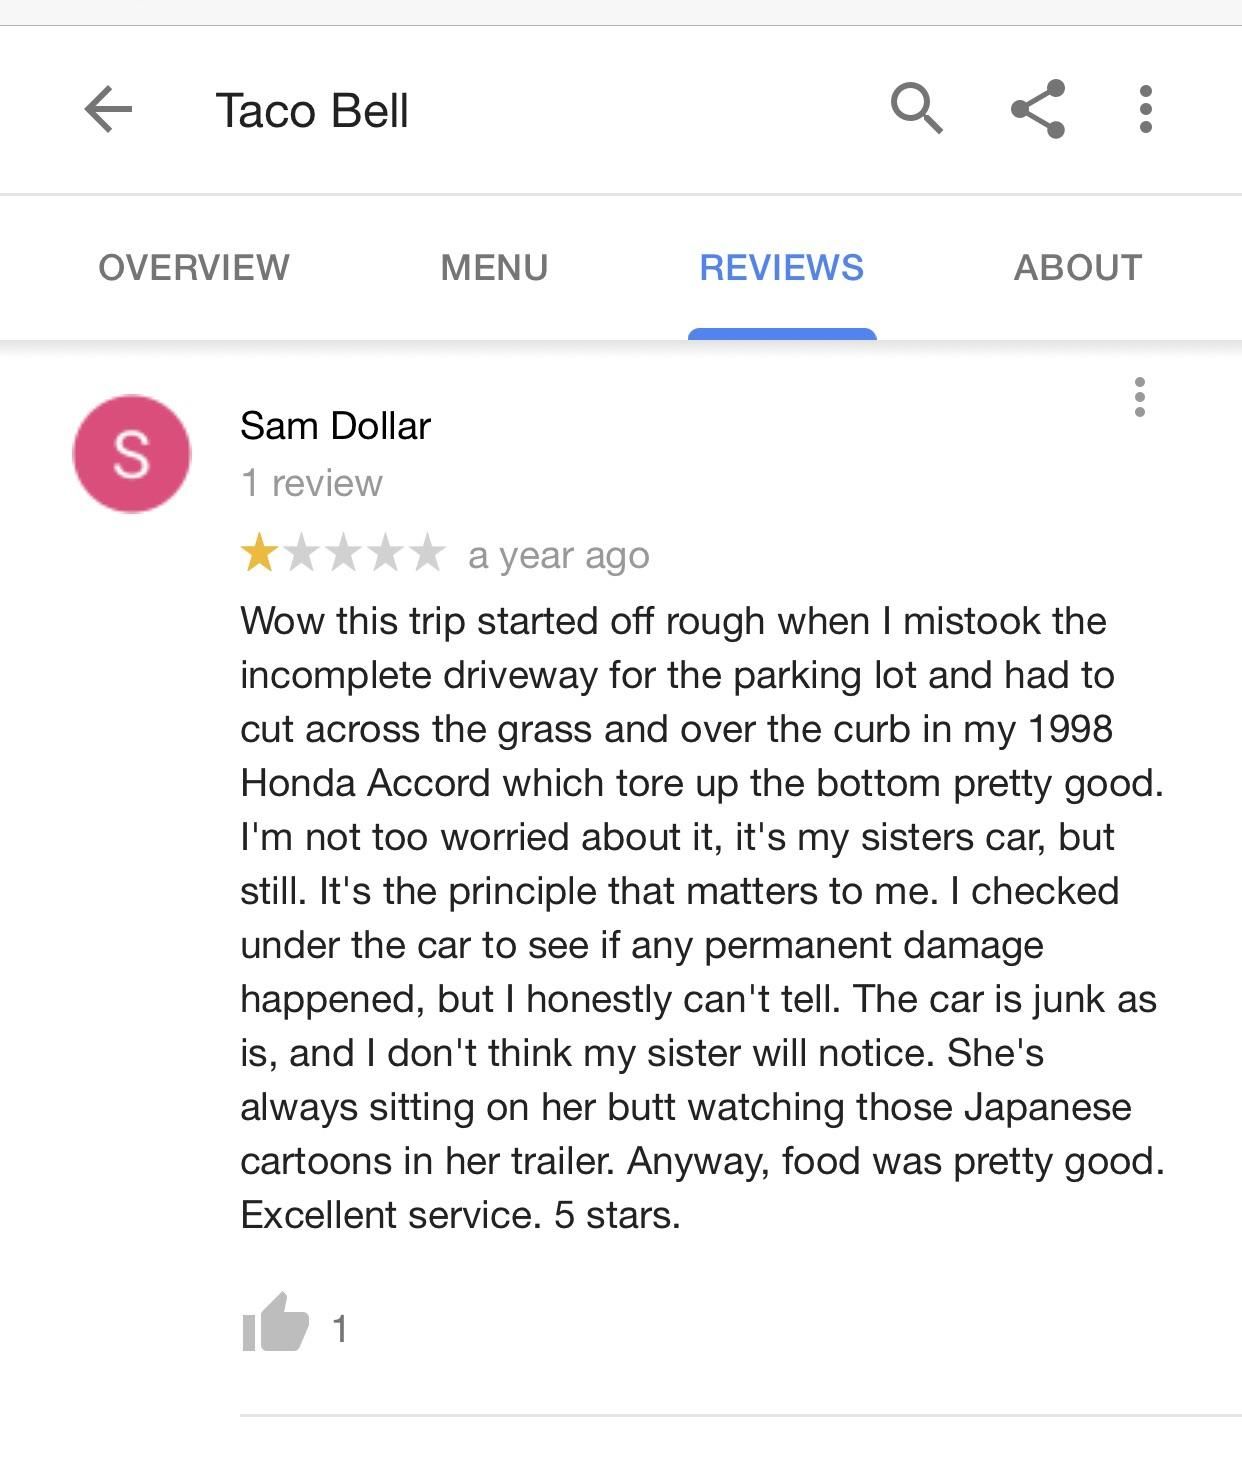 Taco Bell review I stumbled upon...